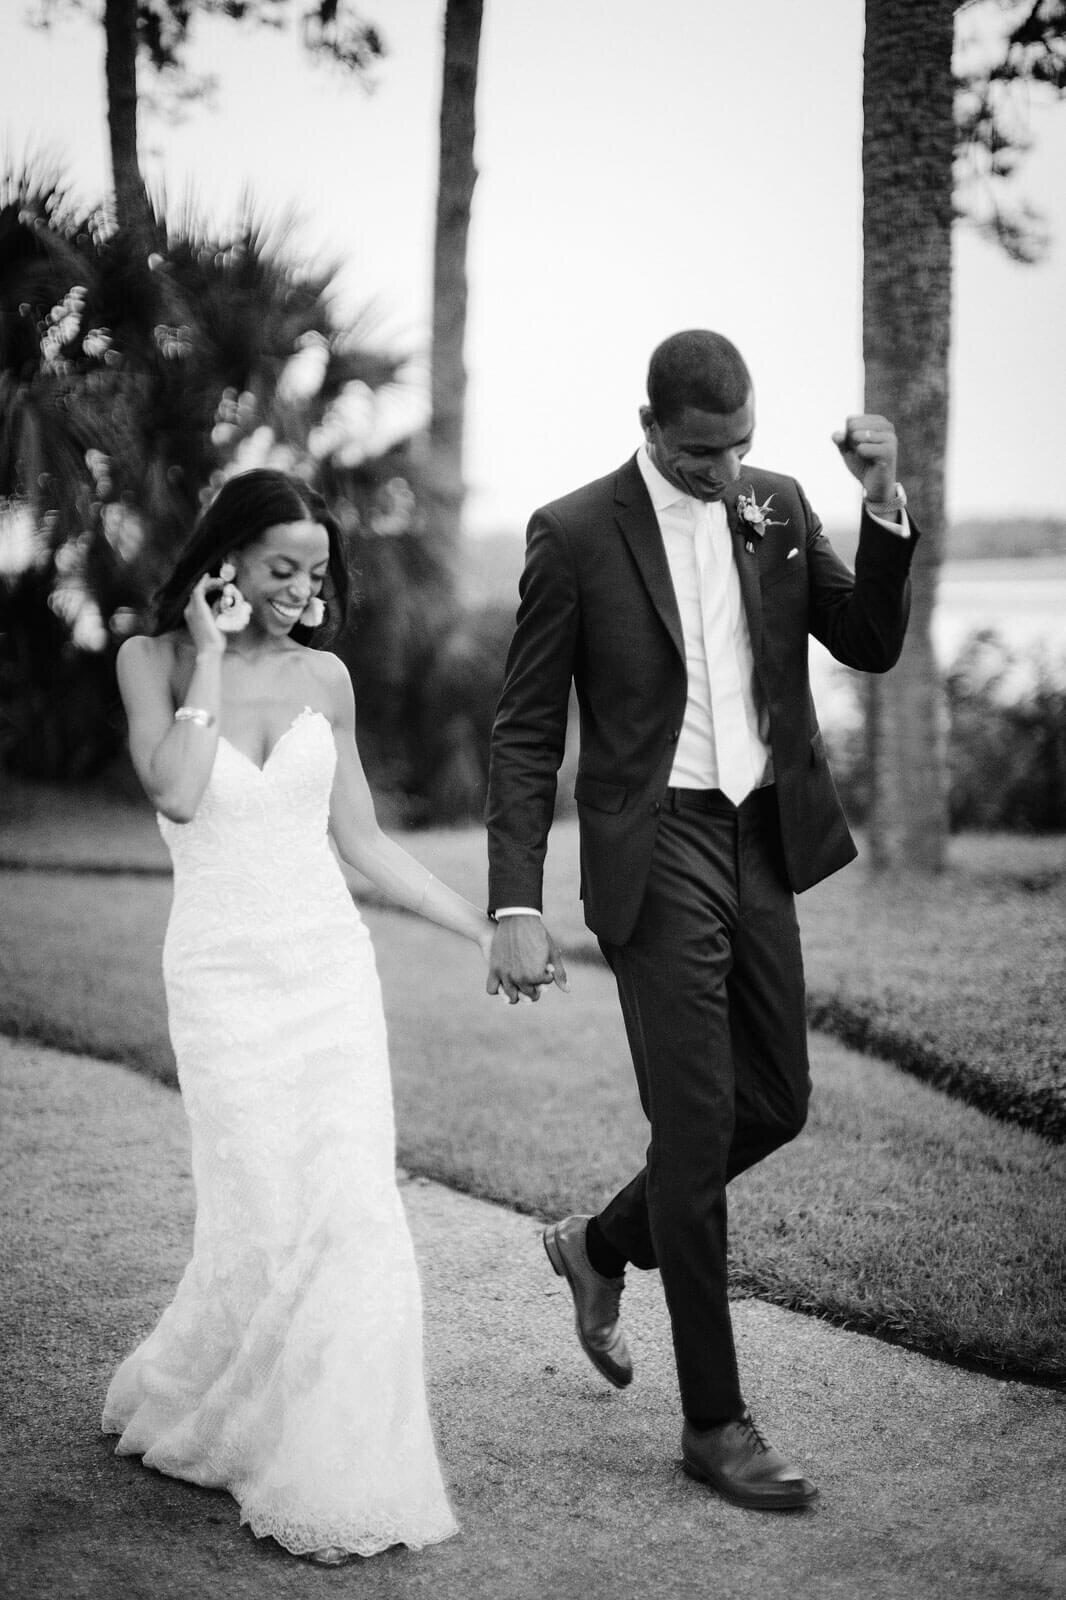 The bride and groom are happily walking outdoors in Montage at Palmetto Bluff. Destination Wedding Image by Jenny Fu Studio